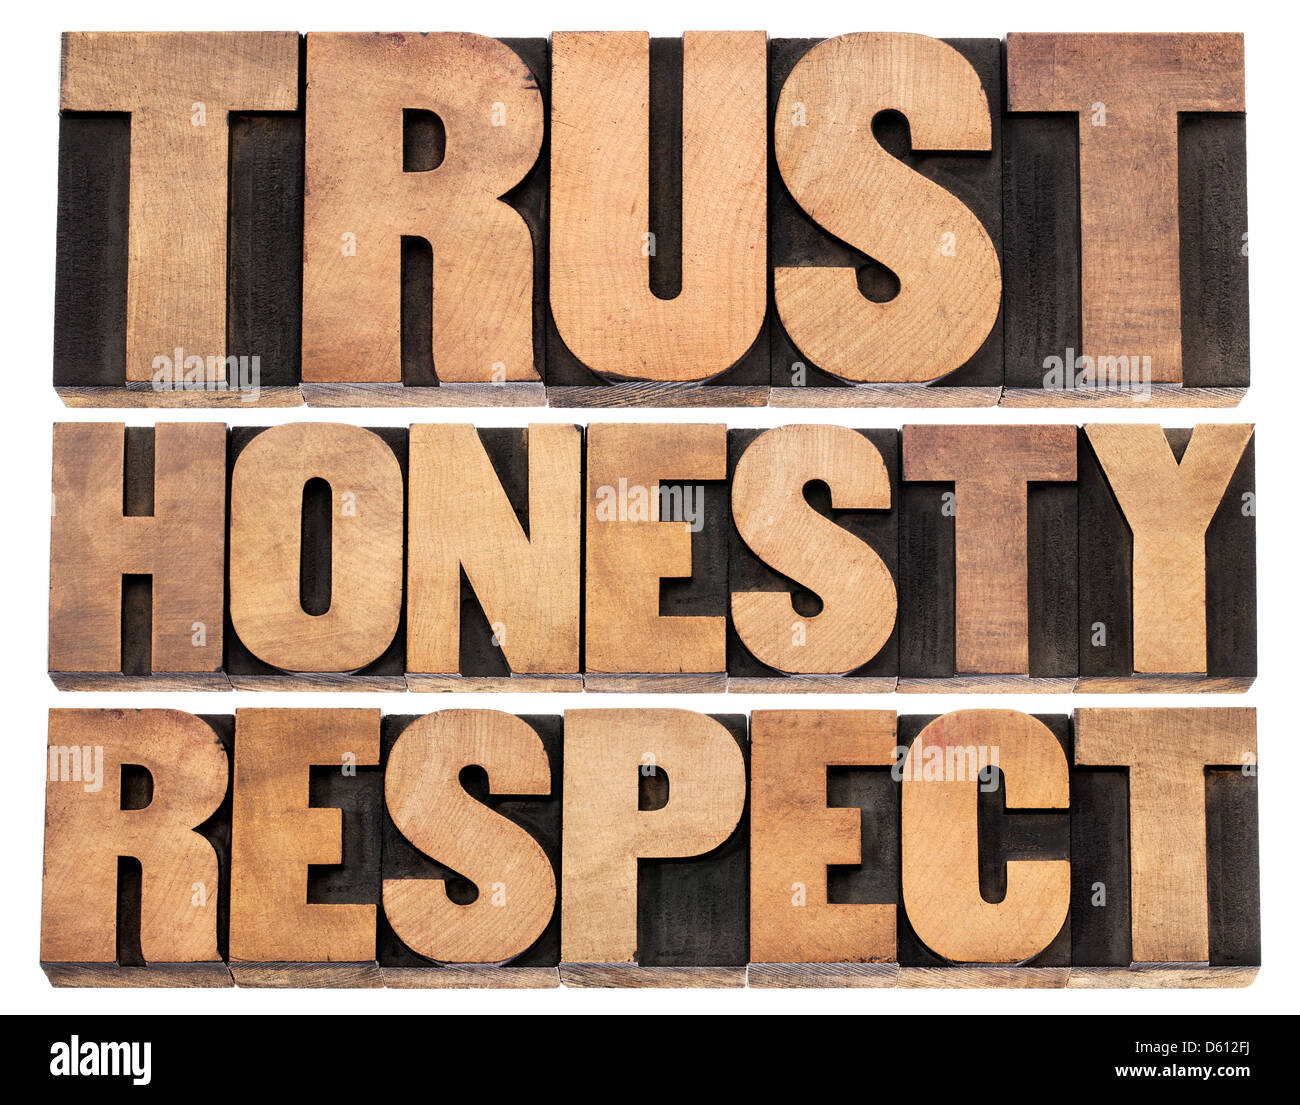 trust, honesty, respect - isolated words in vintage letterpress wood type printing blocks Stock Photo